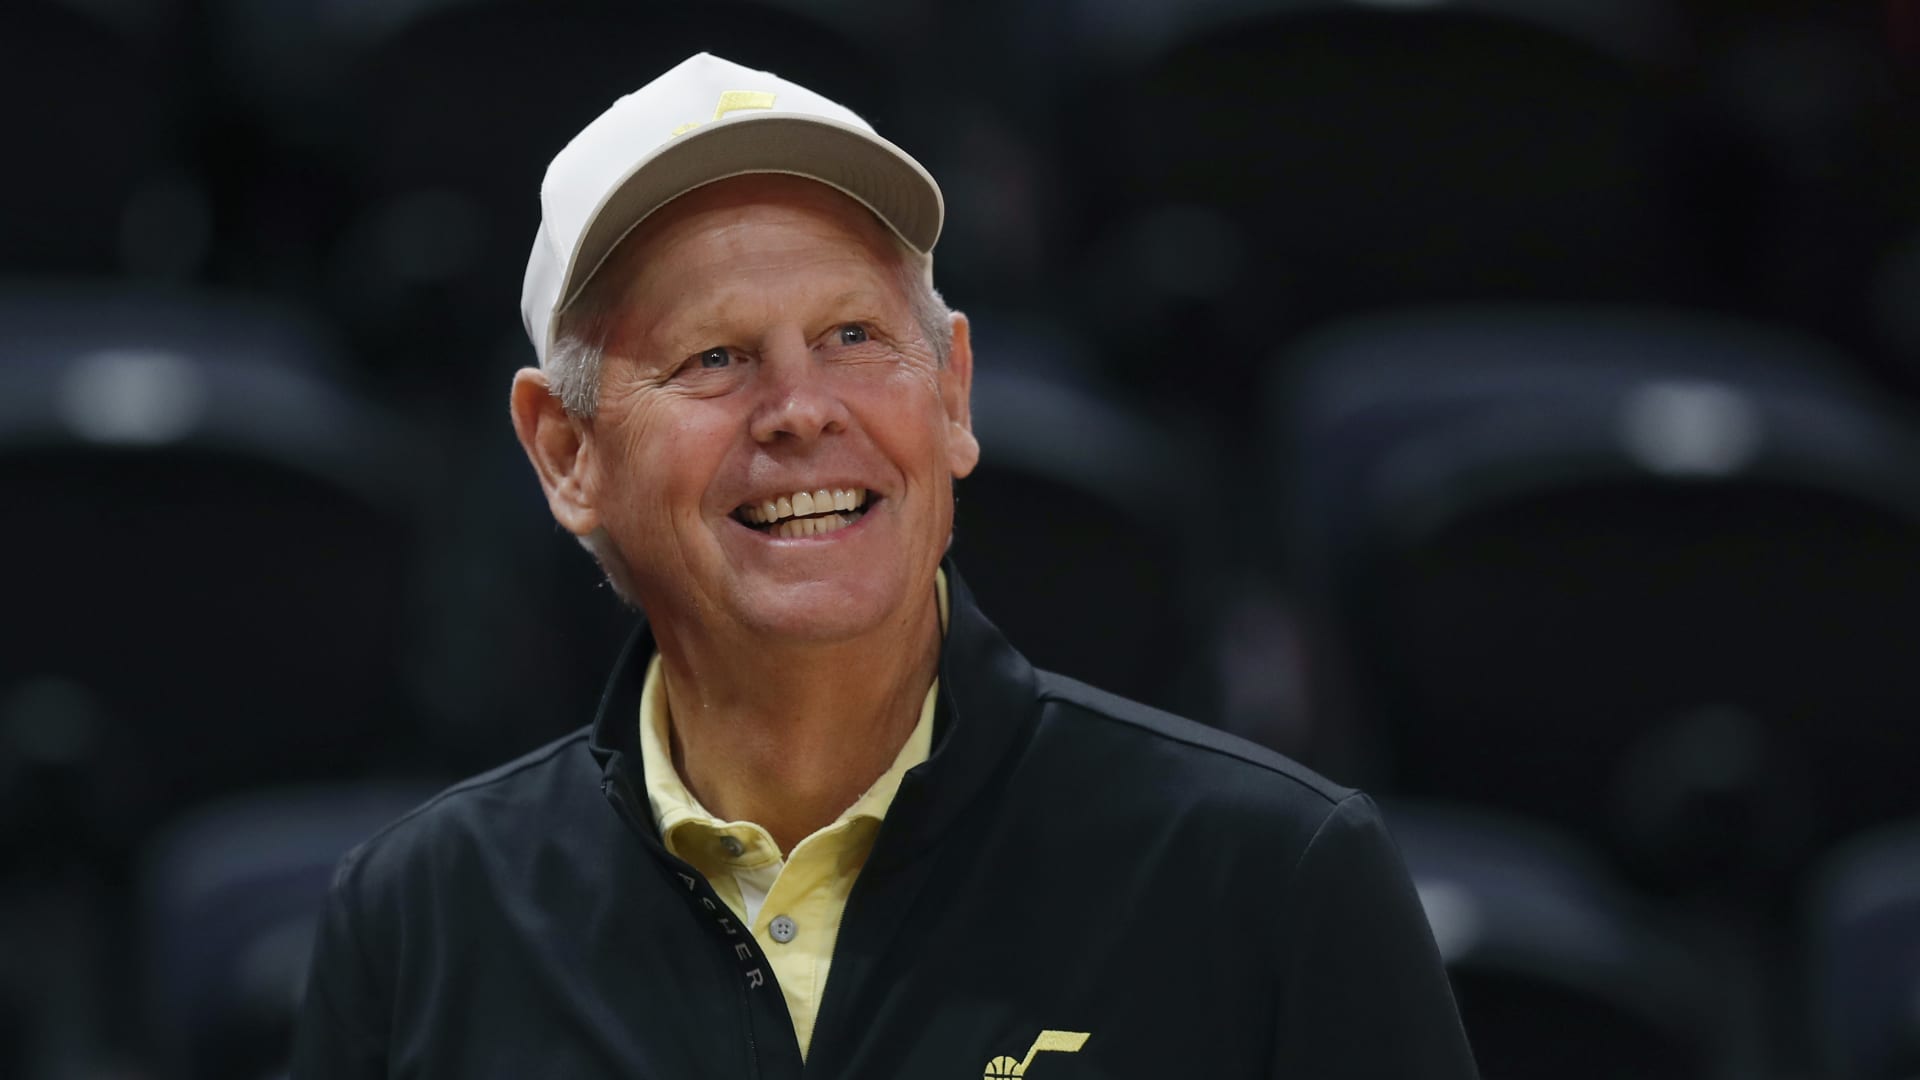 ‘We have scouts all over the world’: Former NBA All-Star Danny Ainge takes a money shot for global talent